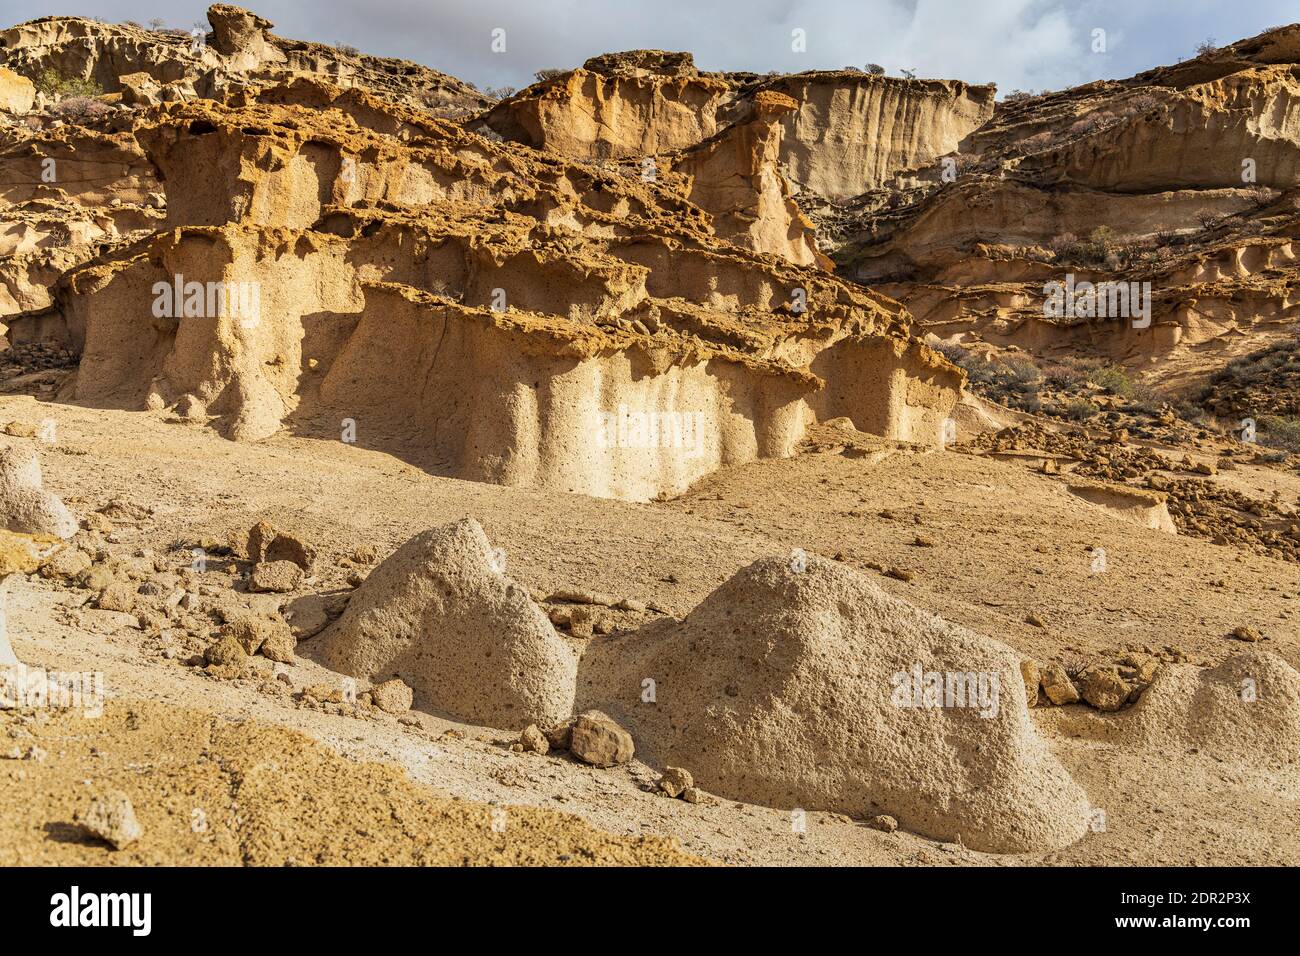 Lunar landscape, volcanic deposits eroded by wind and rain in the barranco de las monjas on a day with dramatic lighting in Granadilla, Tenerife, Cana Stock Photo